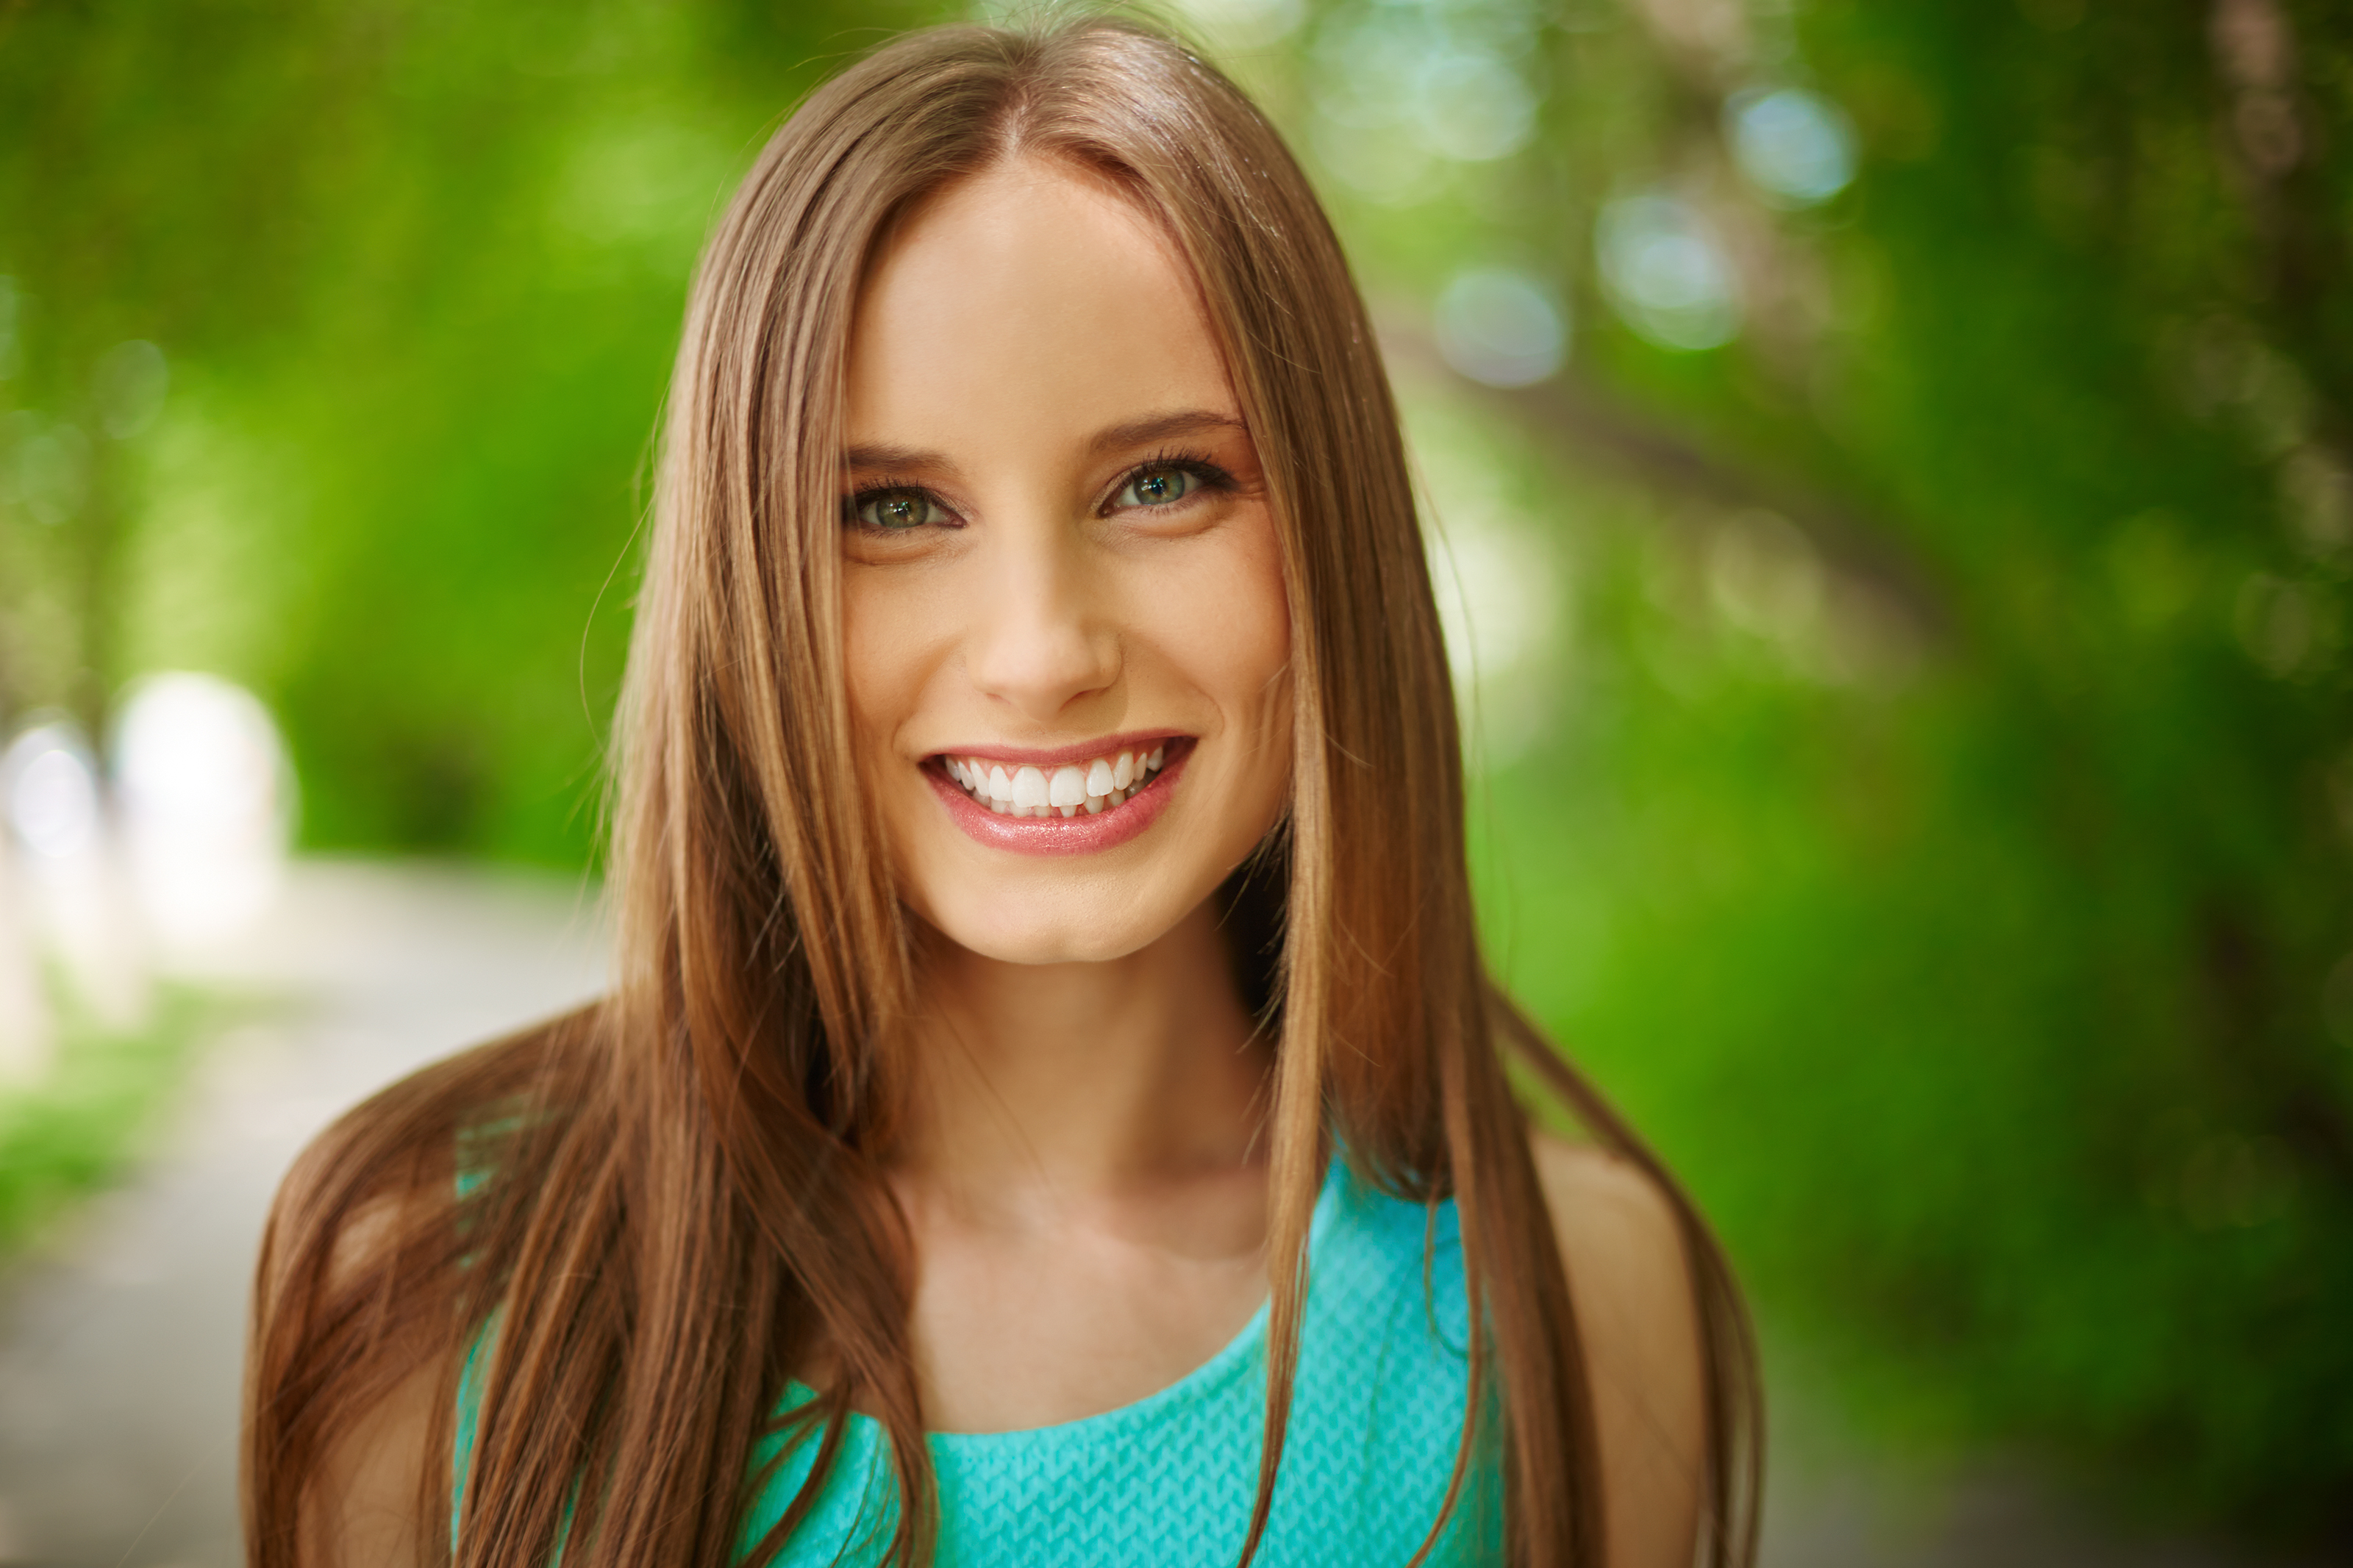 Portrait of smiling girl looking at camera outdoors